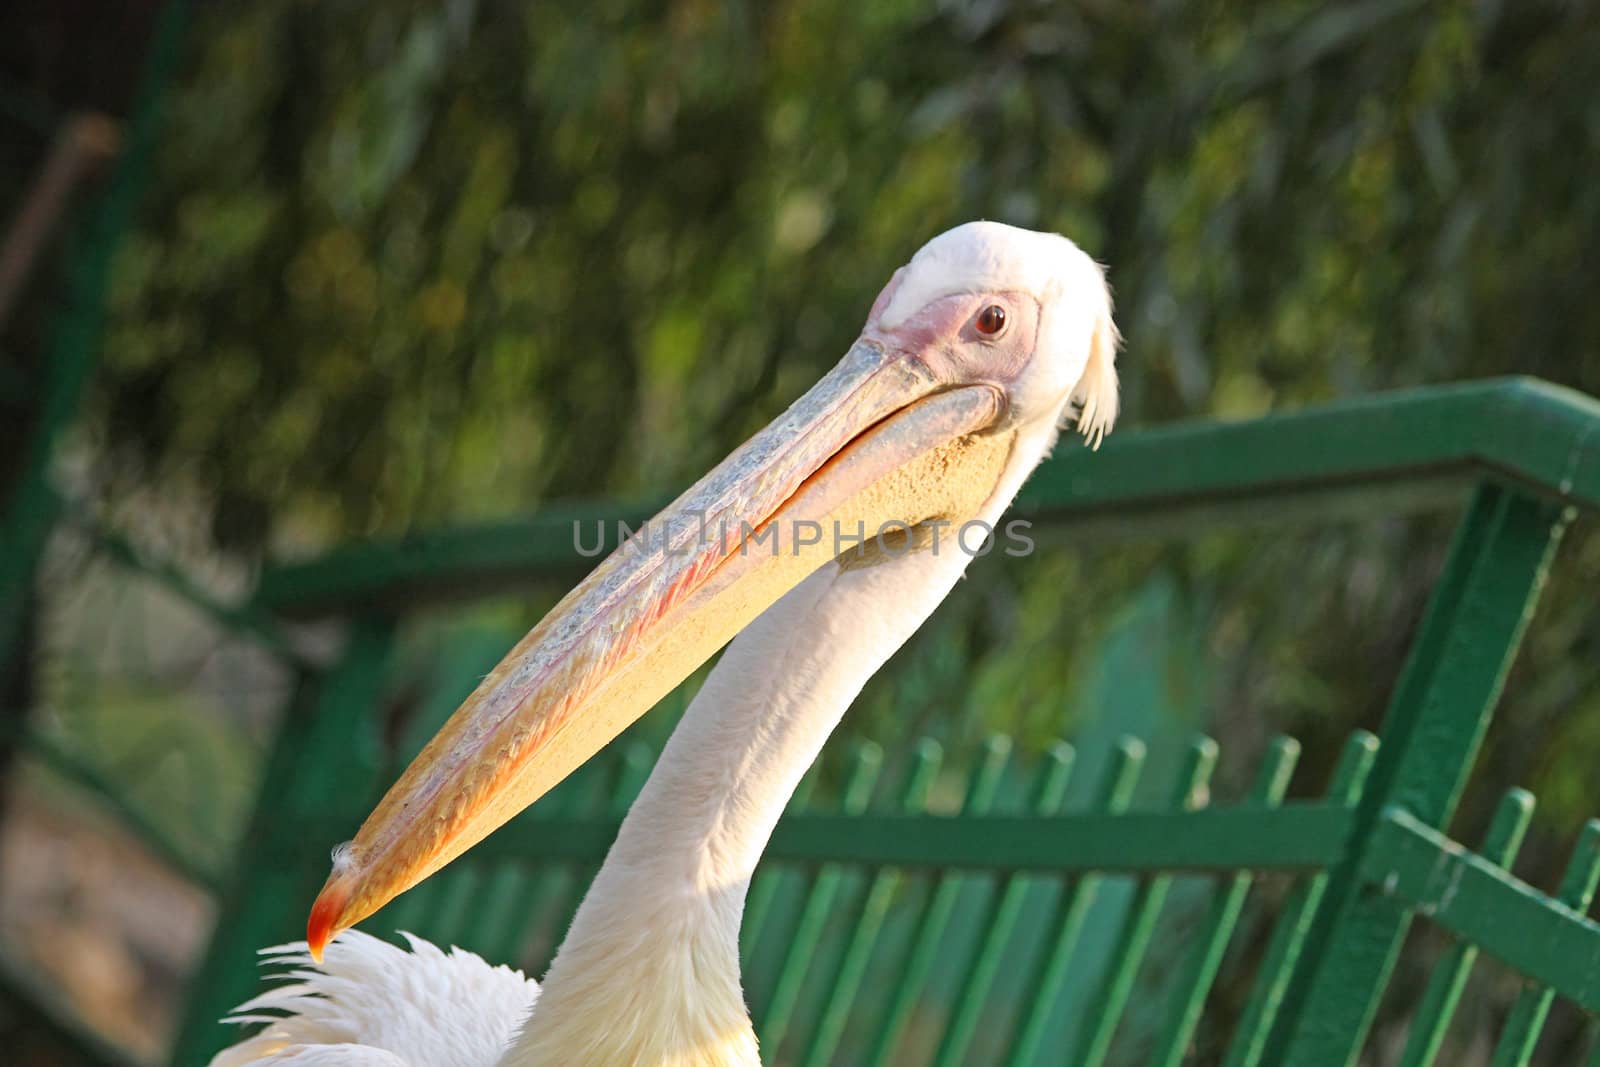 Close up of the pelican's head.